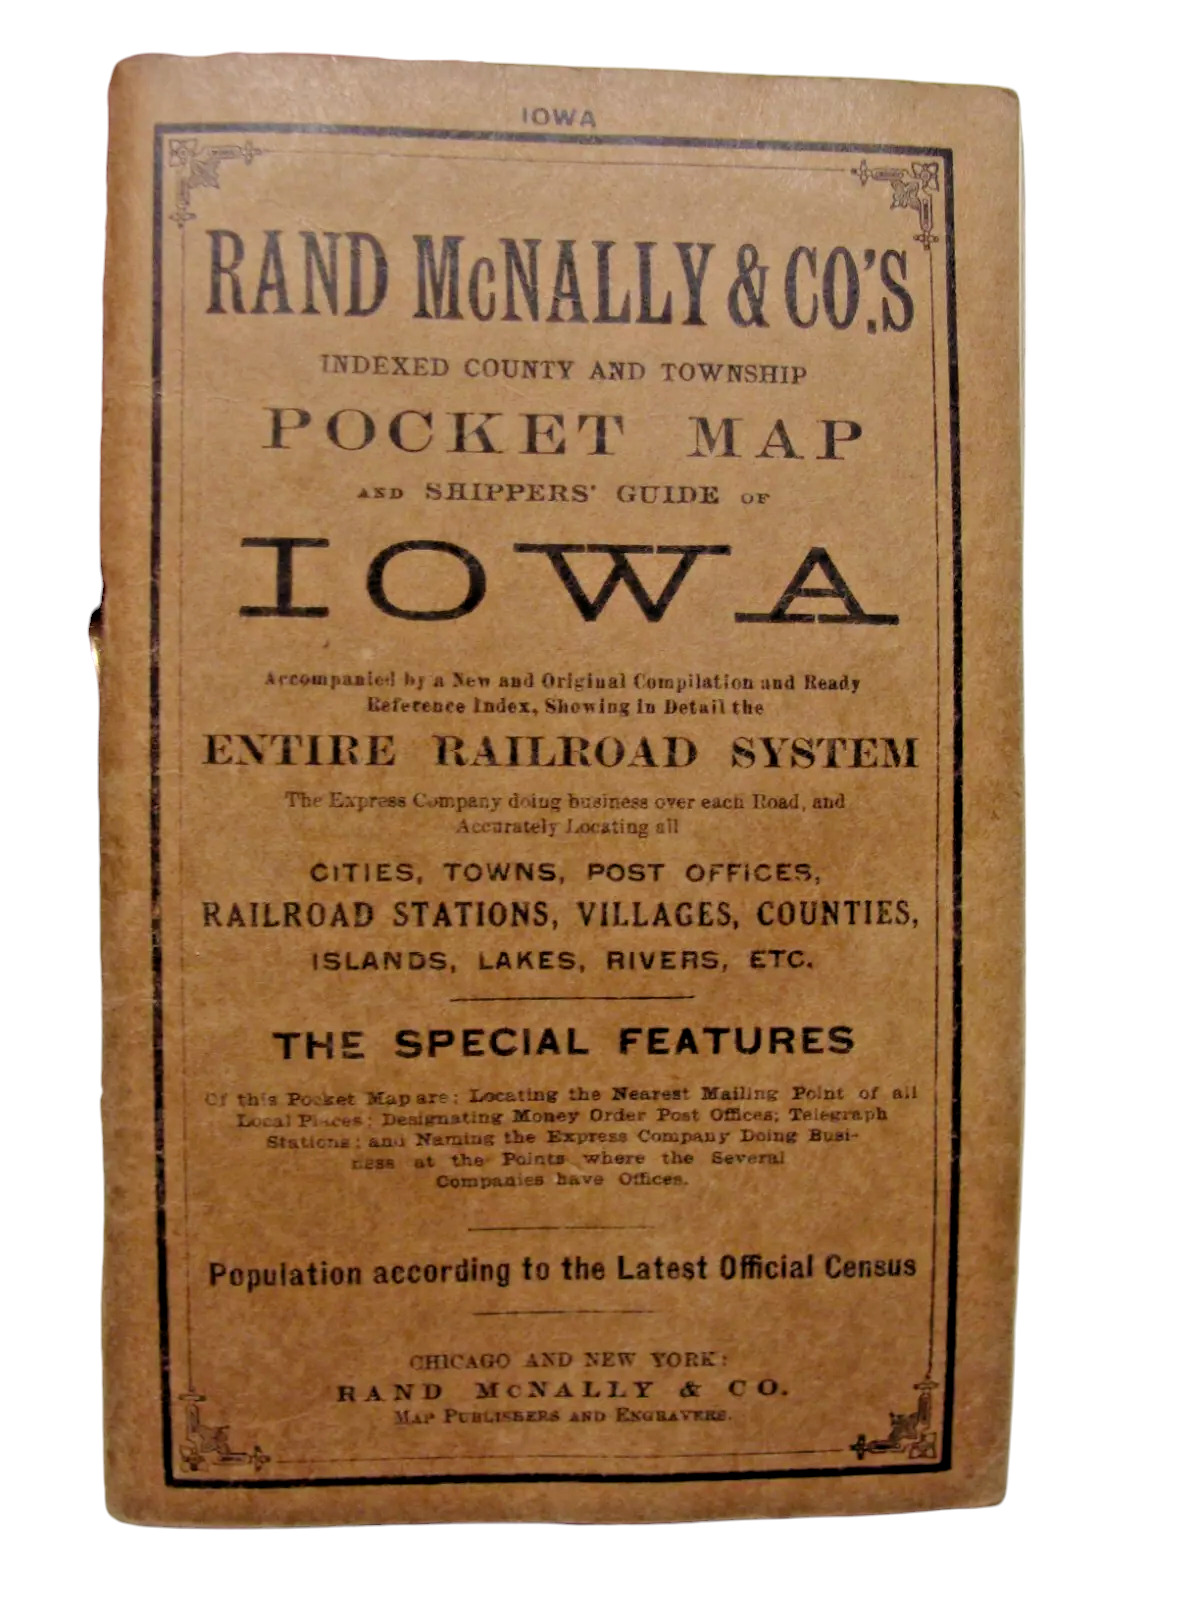 1910 RAND-McNALLY INDEXED Railroad System & POCKET MAP & SHIPPERS' GUIDE OF IOWA